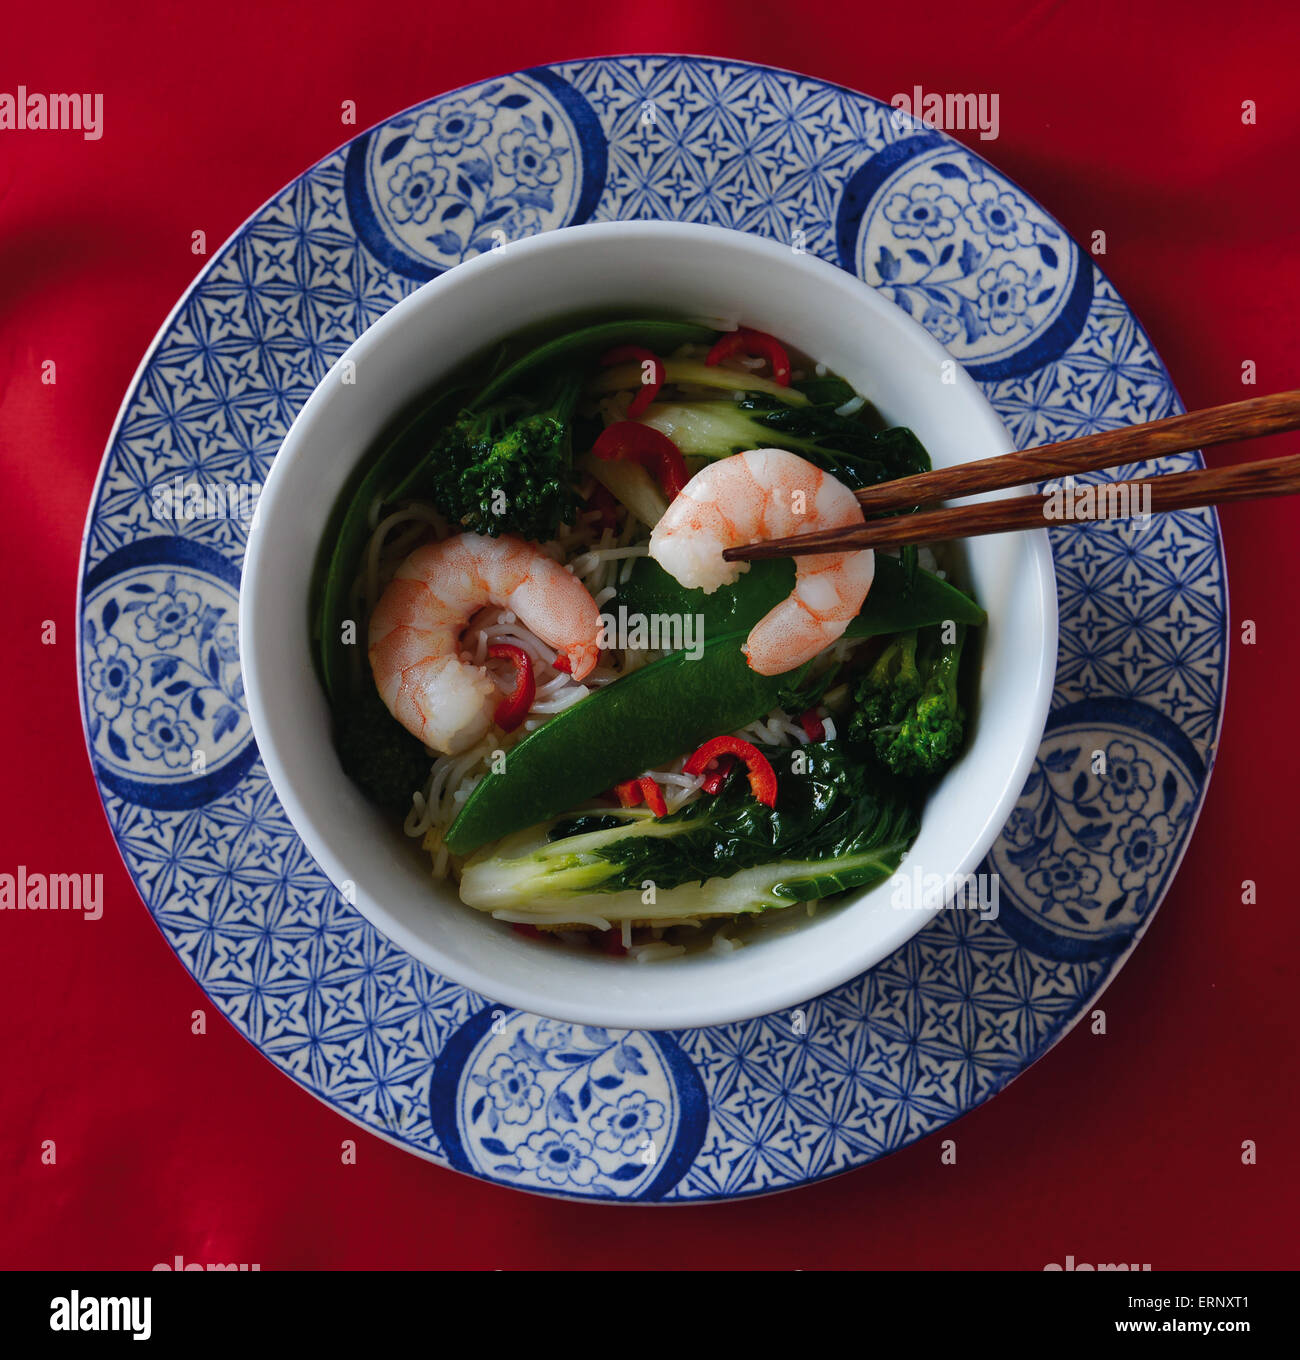 Stir fry shrimps (prawns) with rice noodles on decorative Chinese plate with chopsticks Stock Photo